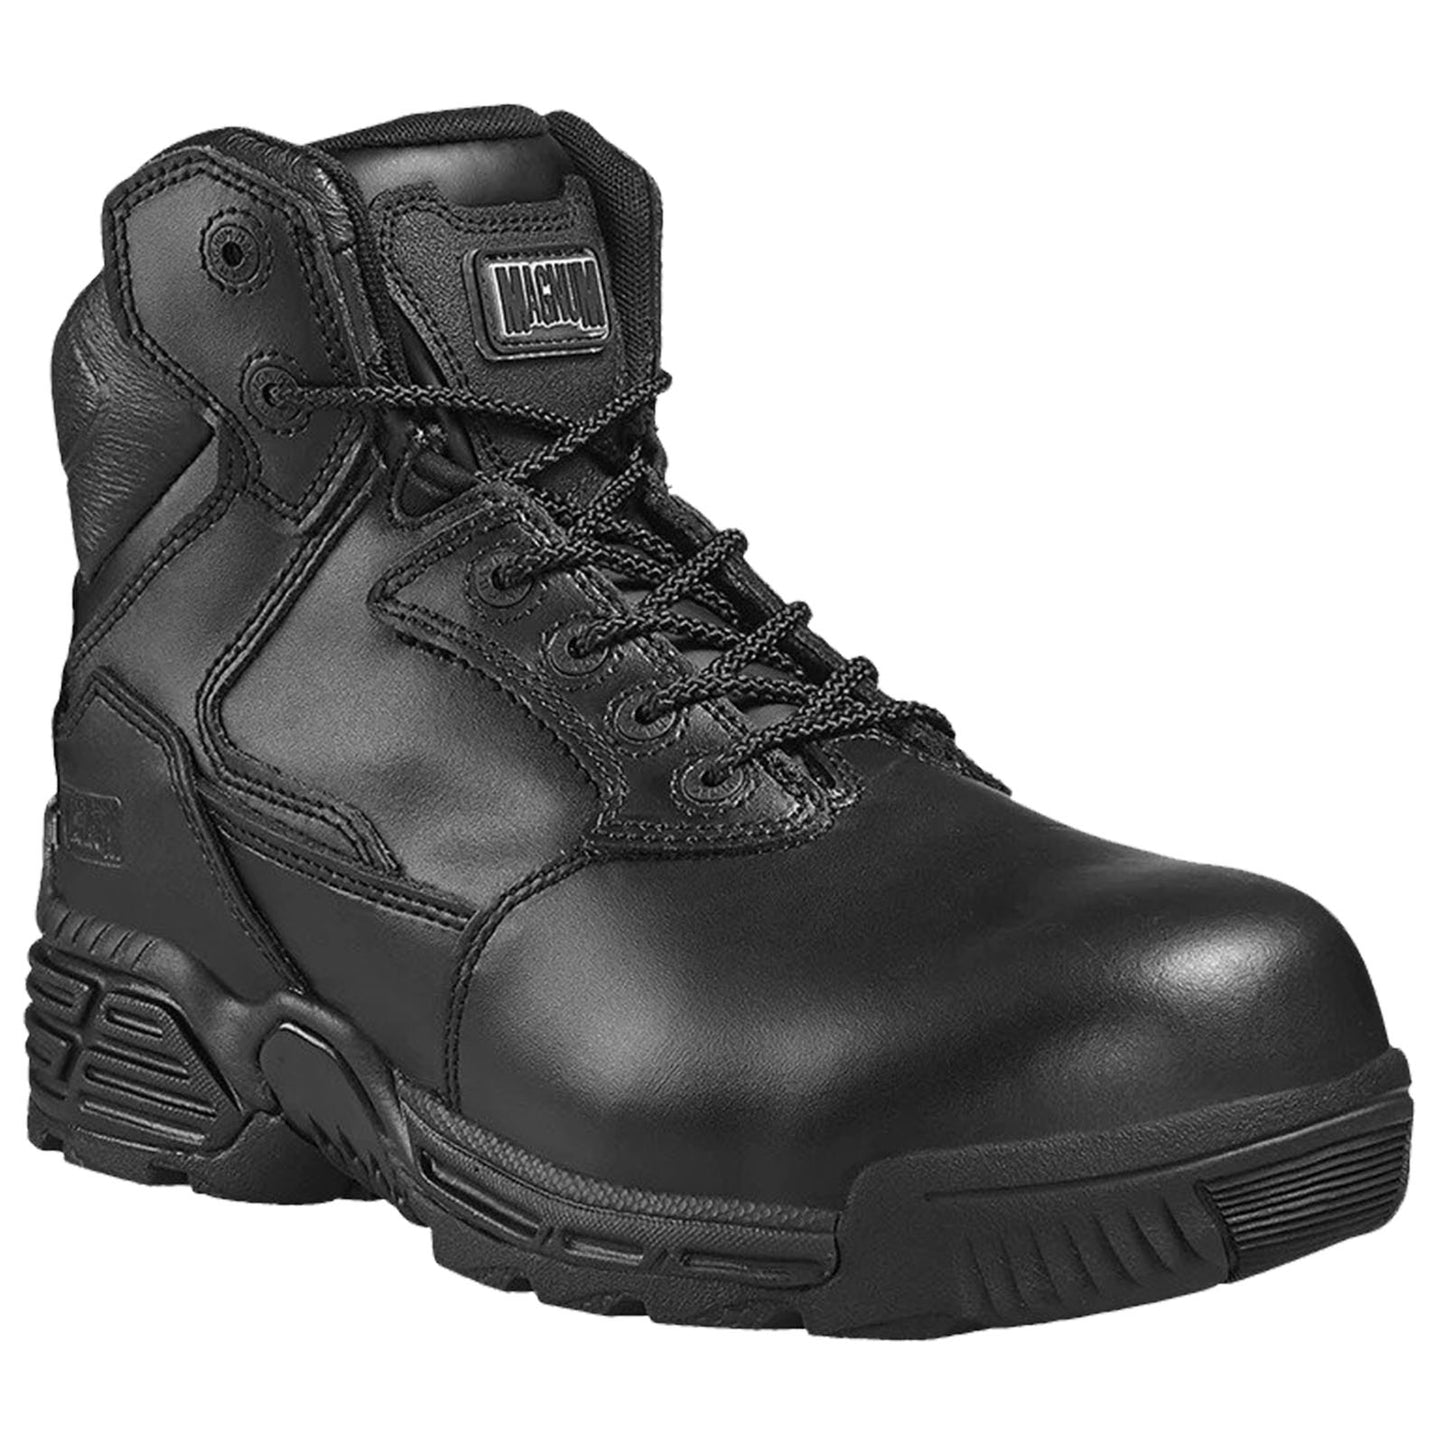 Magnum Unisex Stealth Force 6.0 Safety Boots M801429